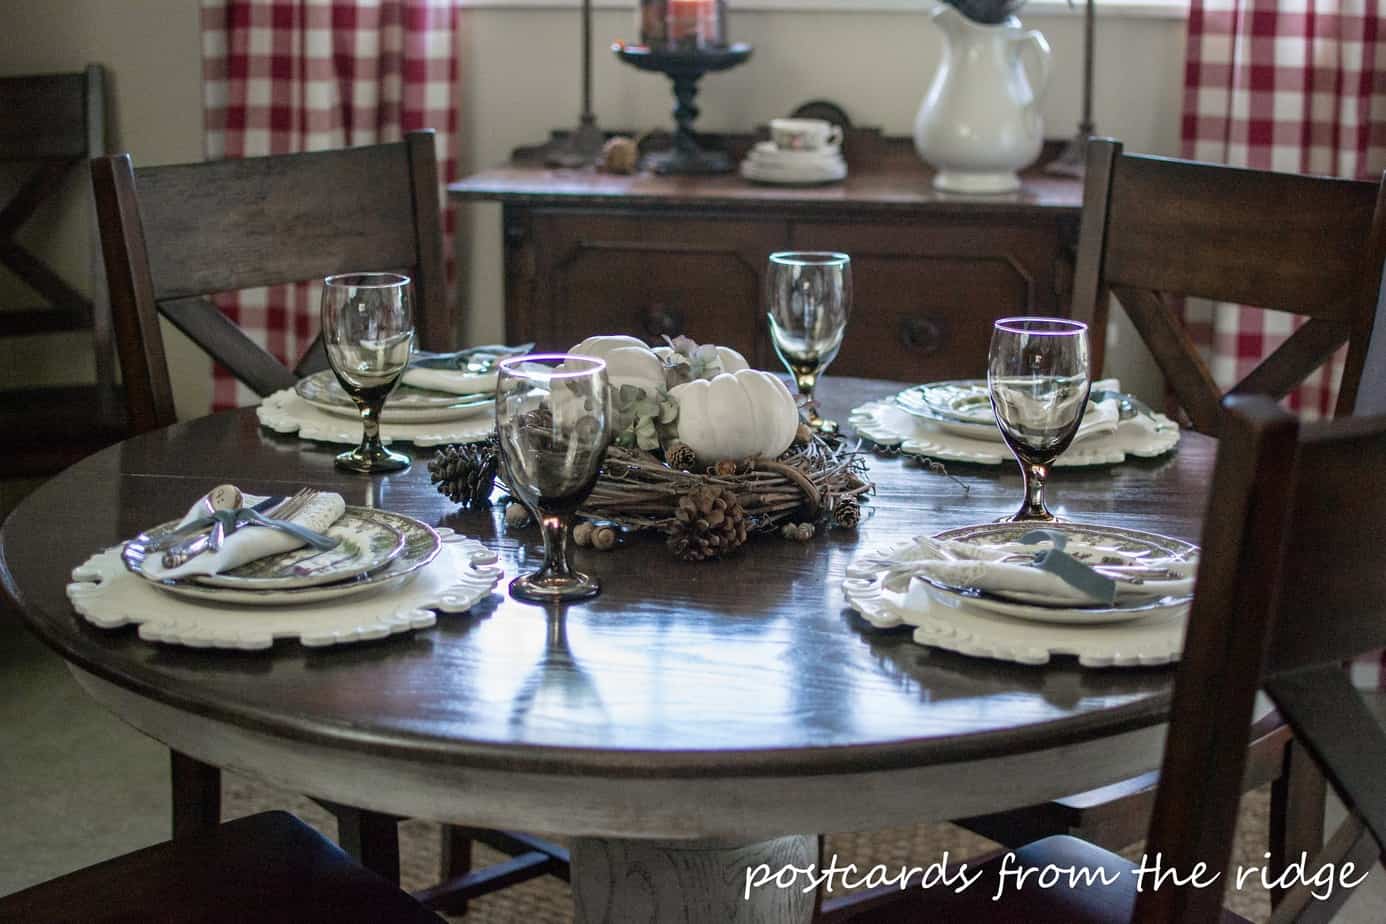 Vintage silverware and linens paired with brown transferware. And a nice centerpiece using natural items.